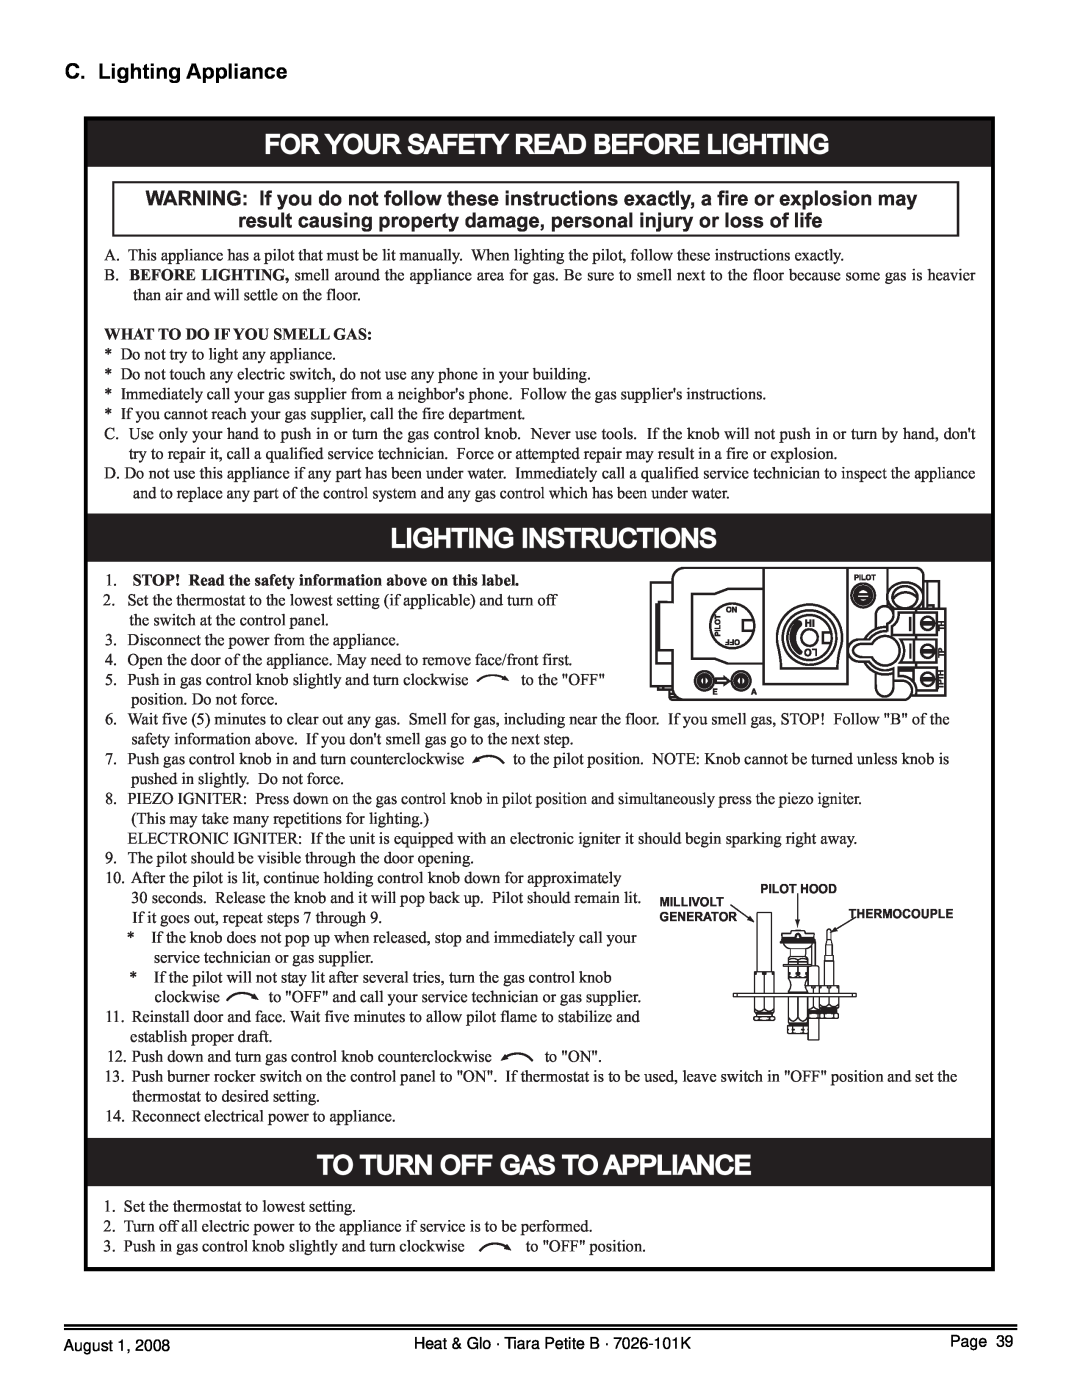 Heat & Glo LifeStyle TIARAP-BR C. Lighting Appliance, For Your Safety Read Before Lighting, Lighting Instructions 